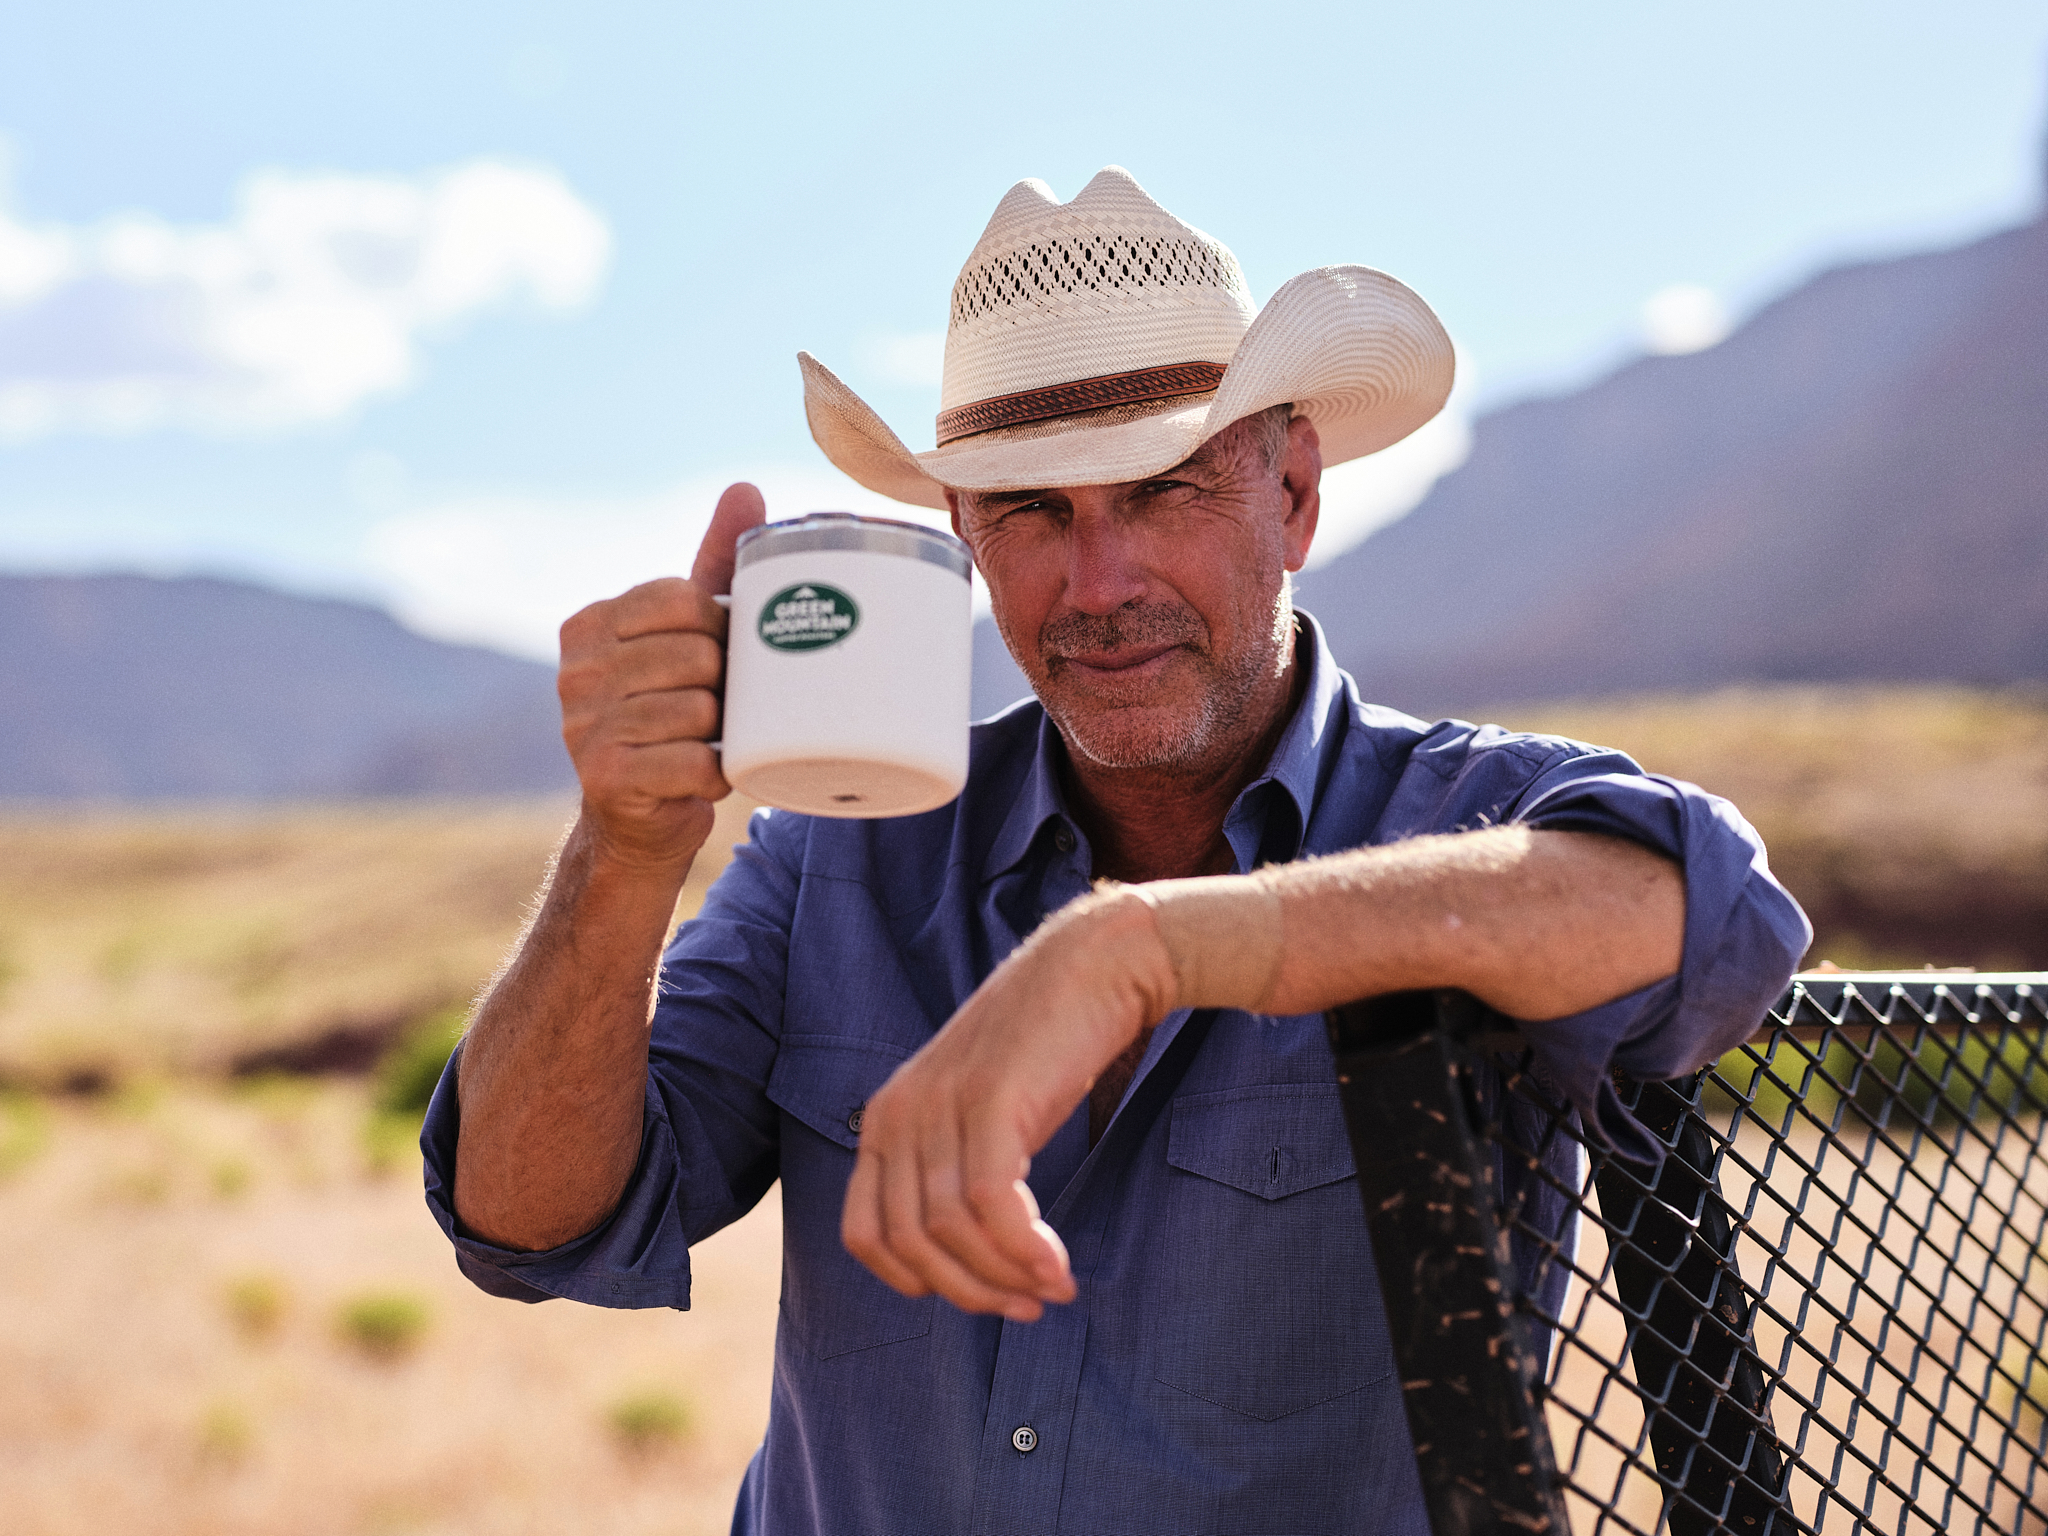 Kevin Costner toasts a Green Mountain Coffee Roasters mug in celebration of his new "Horizon Blend by Kevin Costner" coffee line. Photo credit: Green Mountain Coffee Roasters